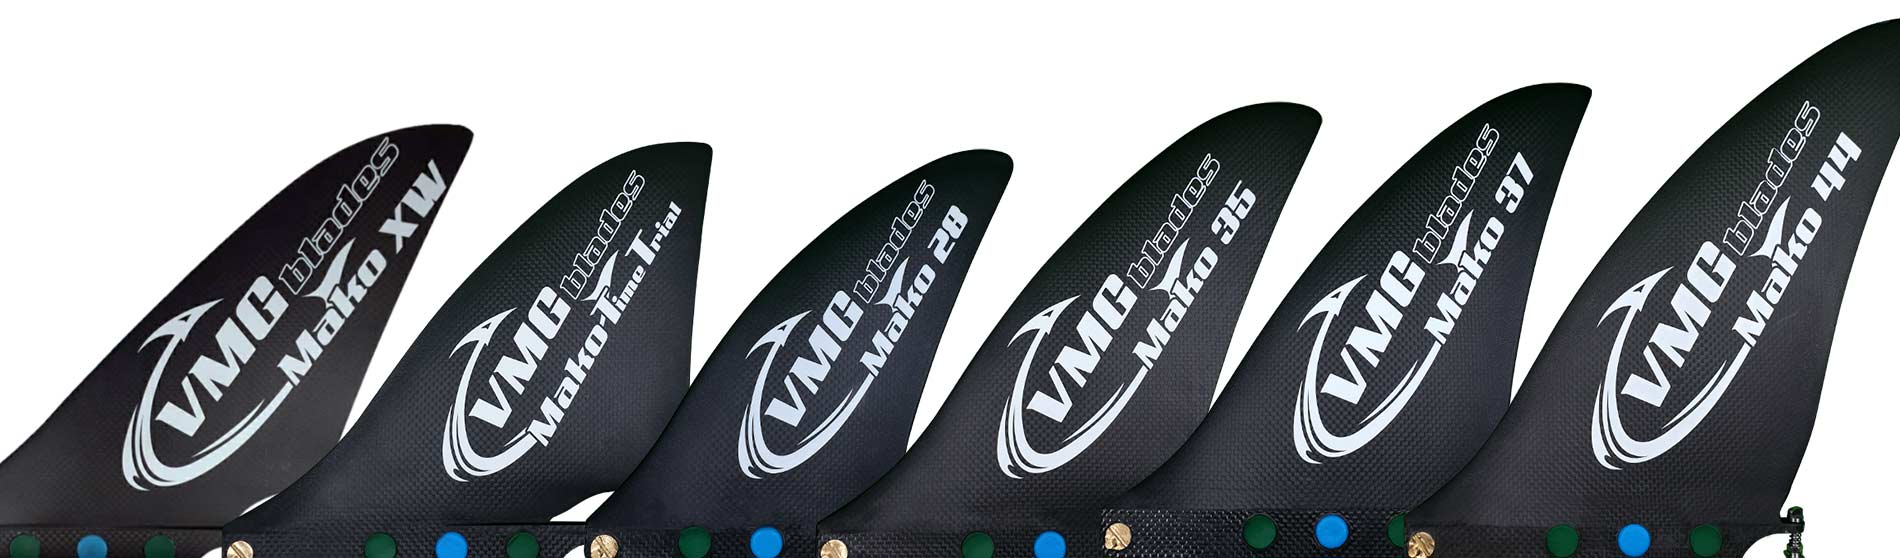 VMG blades SUP Race Fins for all conditions 